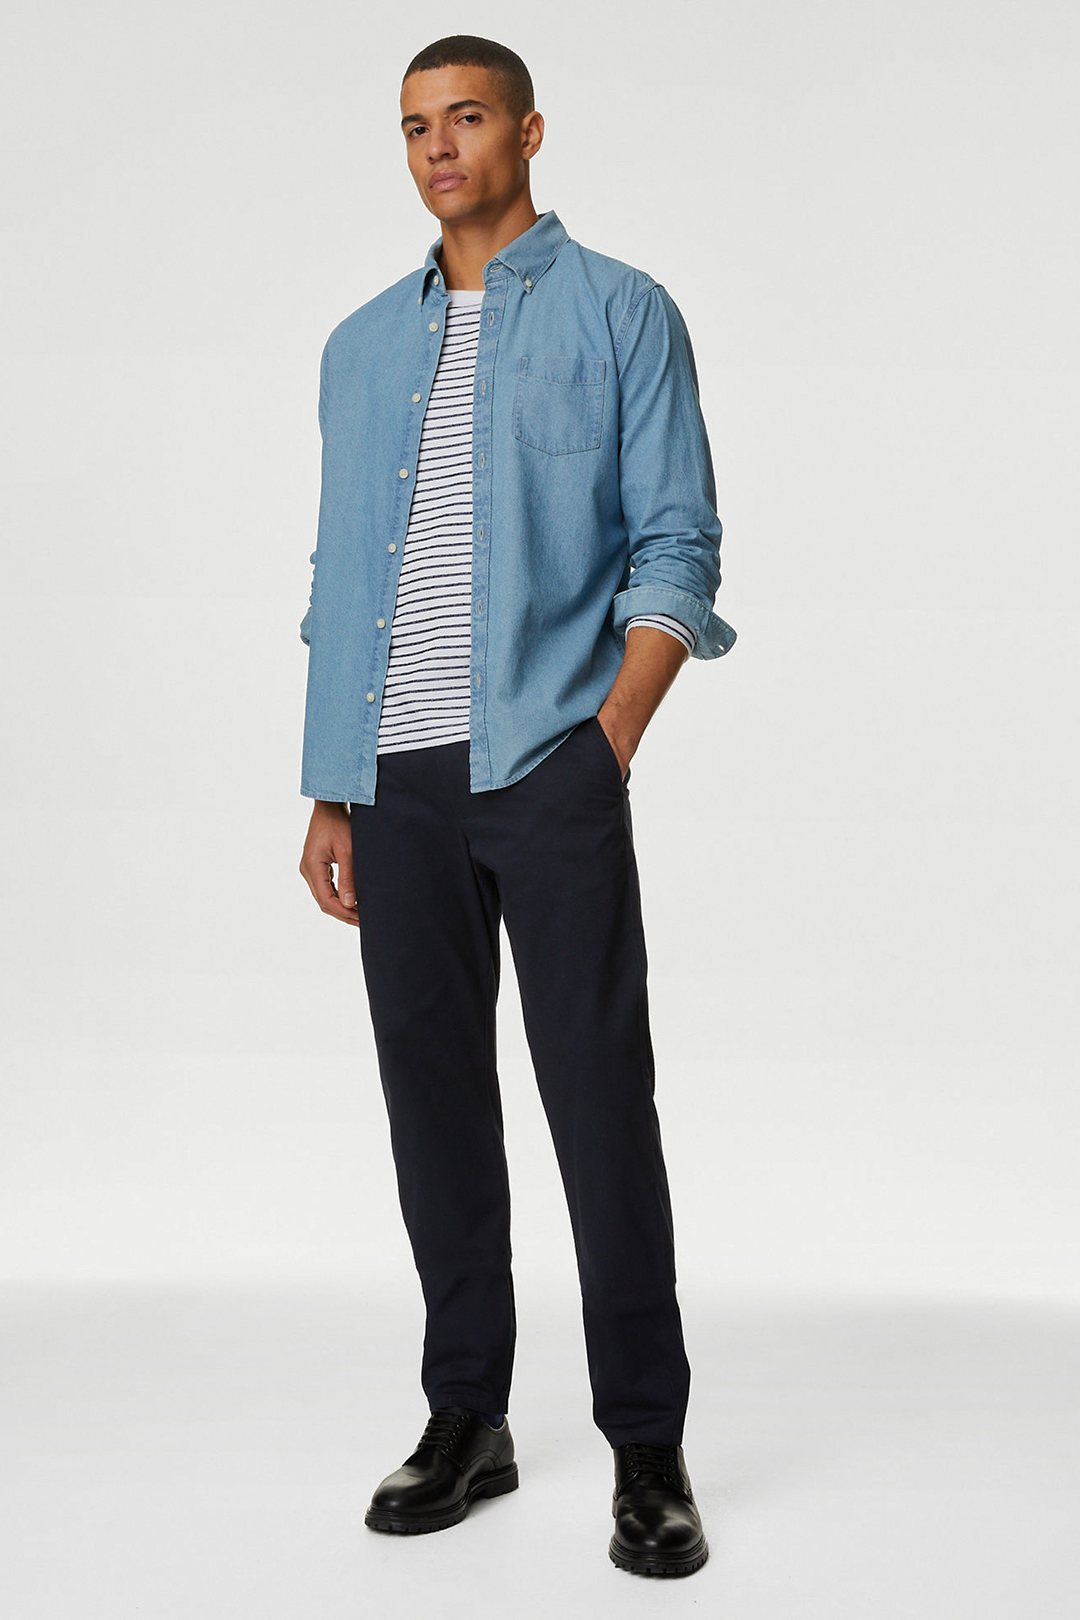 Blue denim shirt, white striped shirt, navy chinos, and black derby shoes outfit